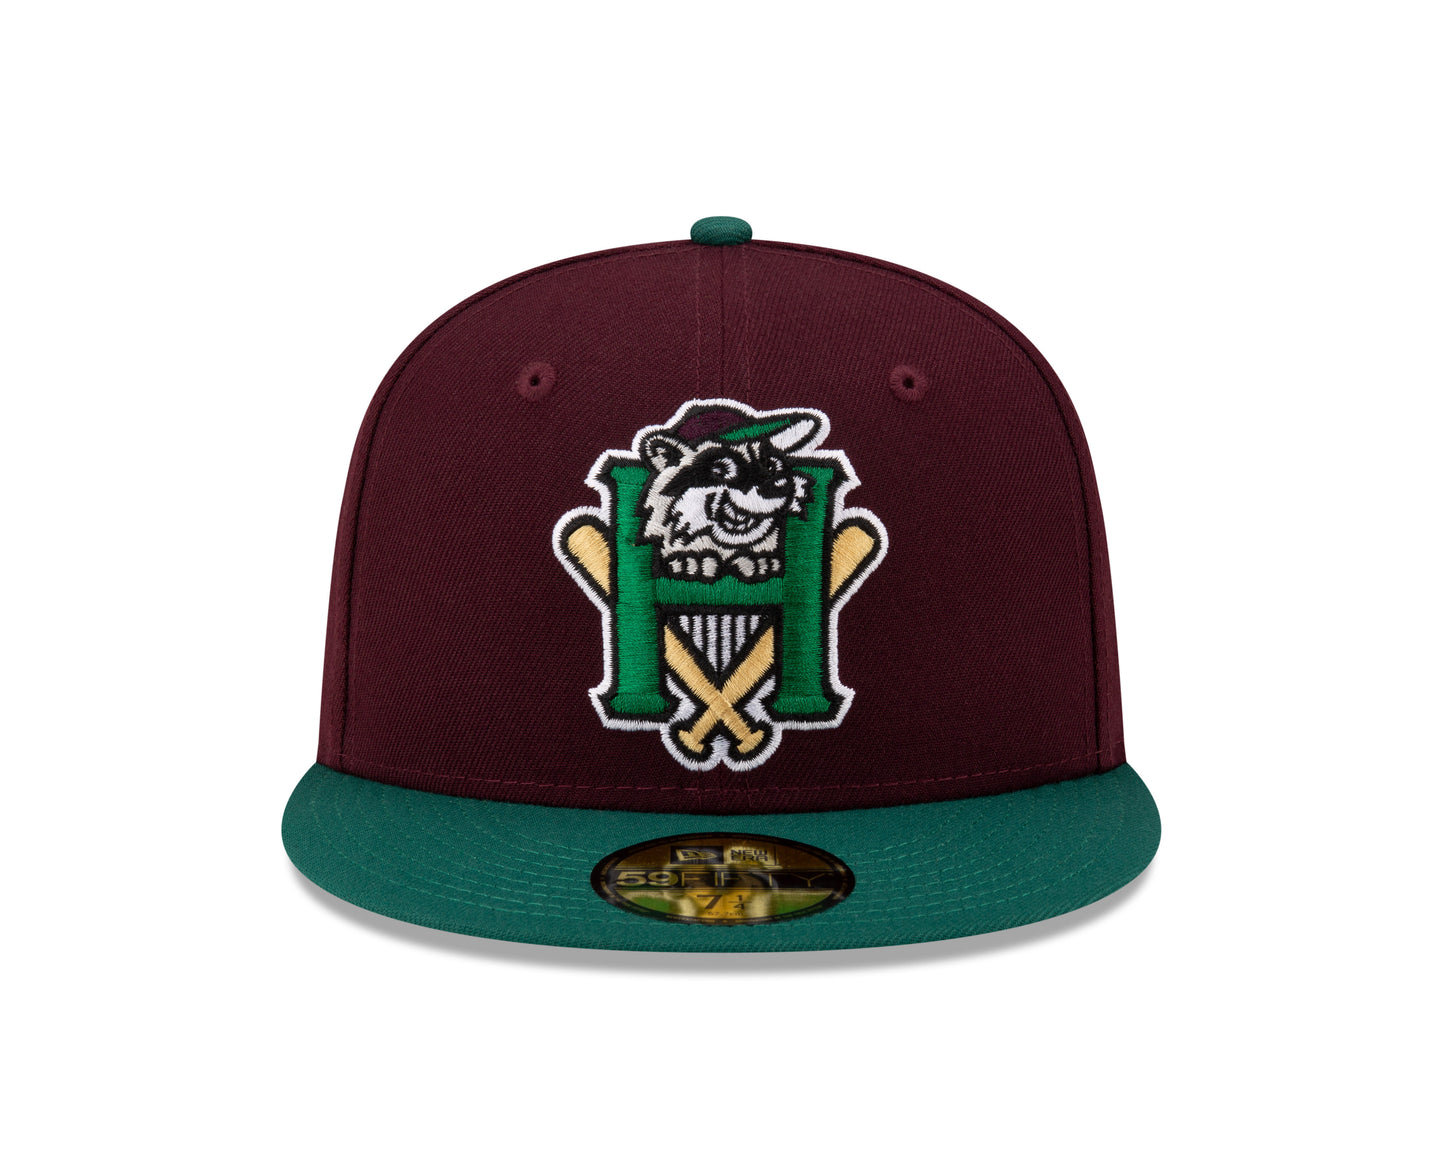 New Era - 59fifty Fitted - MiLB - Theme Night - Hudson Valley Renegades - Maroon/Teal - Headz Up 